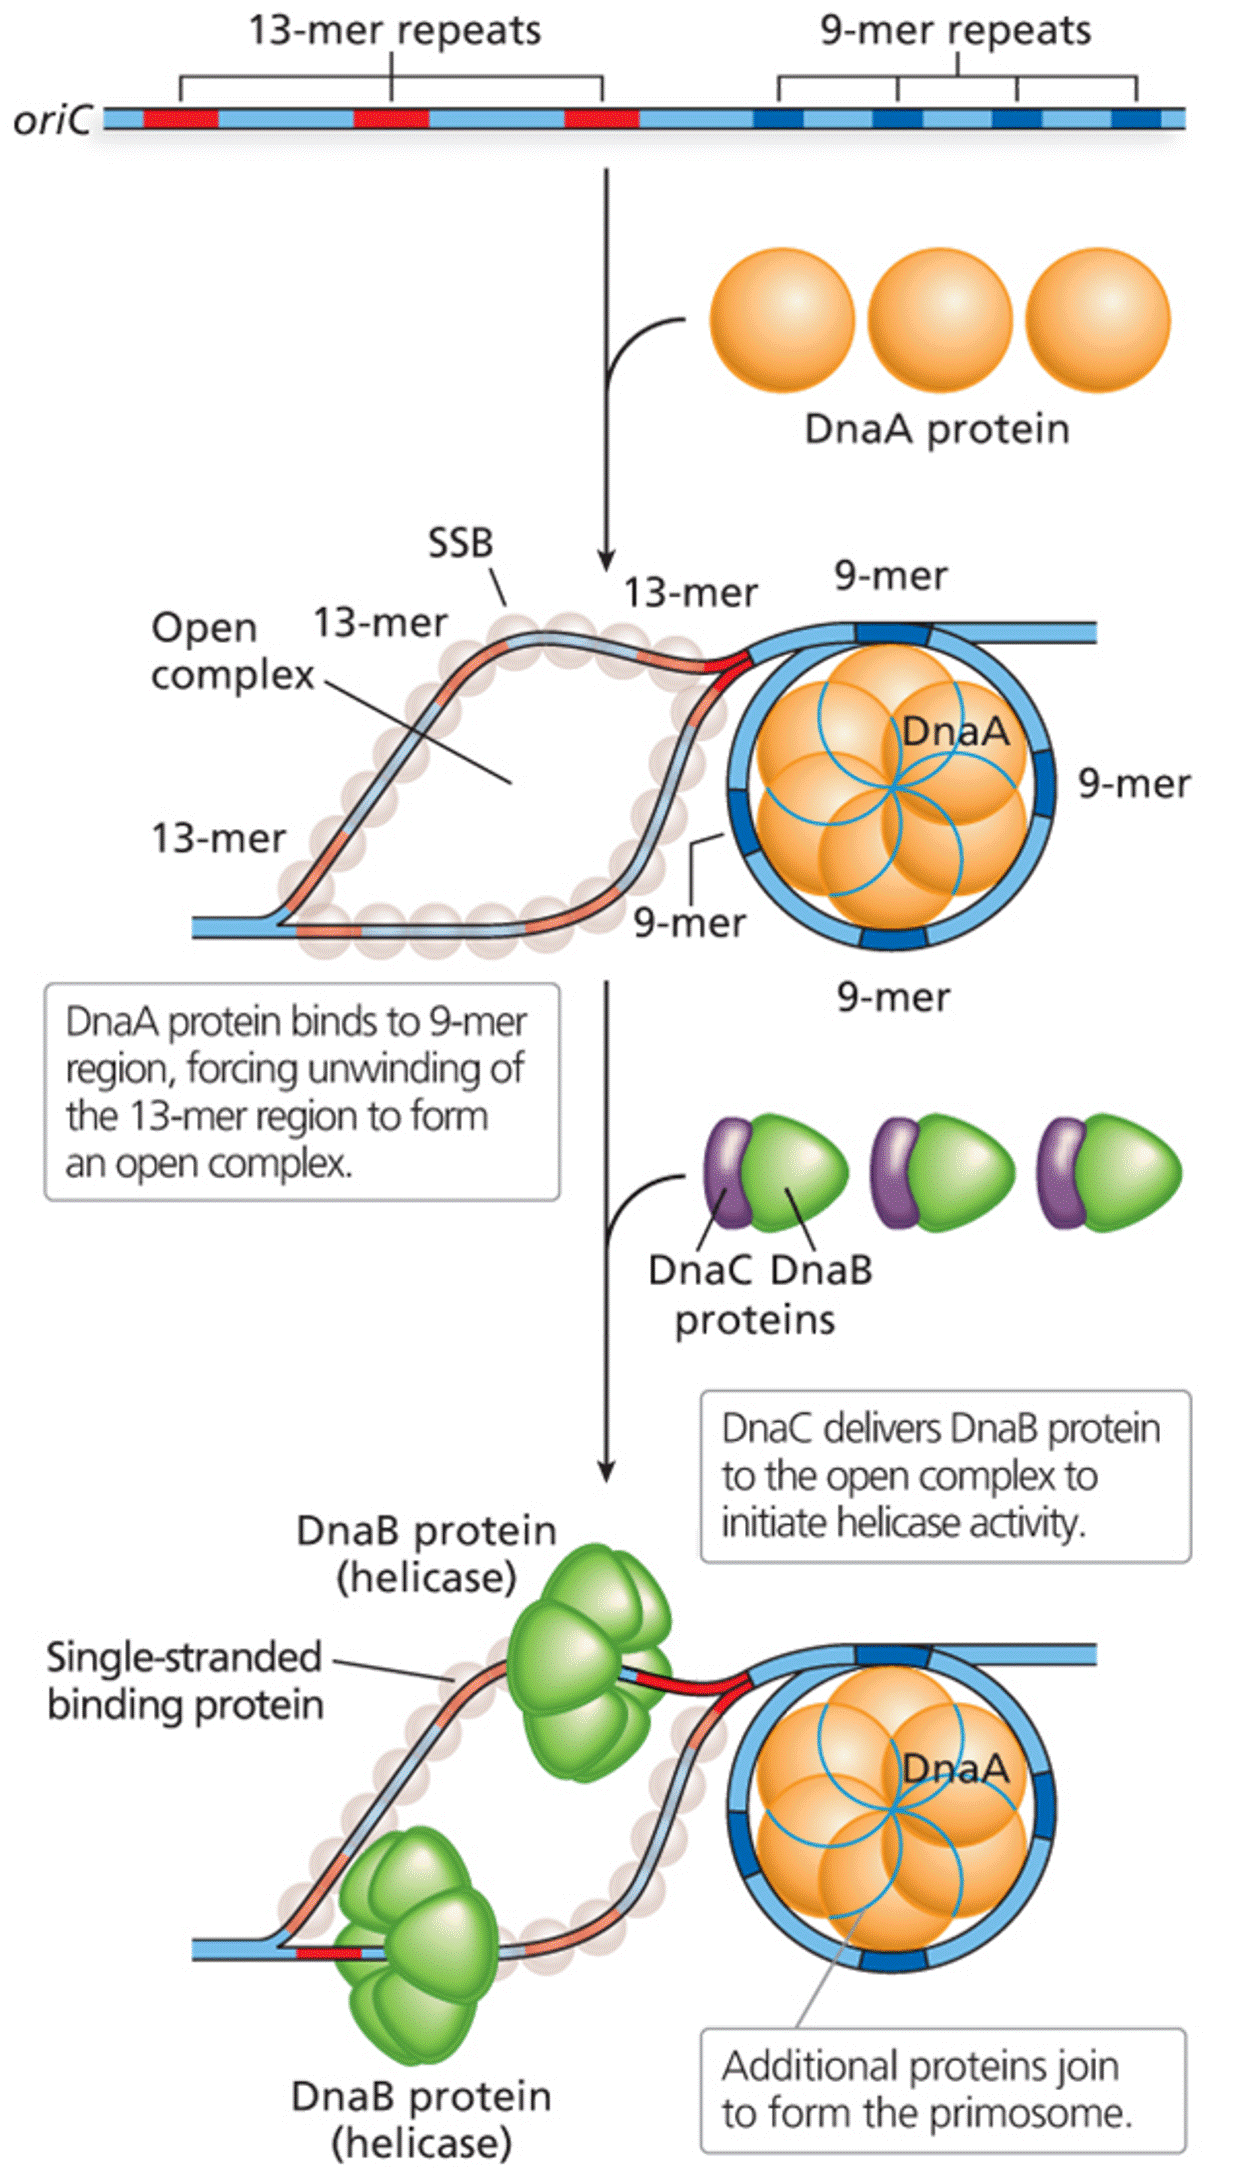 Replication initiation at oriC, requiring DnaA, DnaB, and DnaC proteins